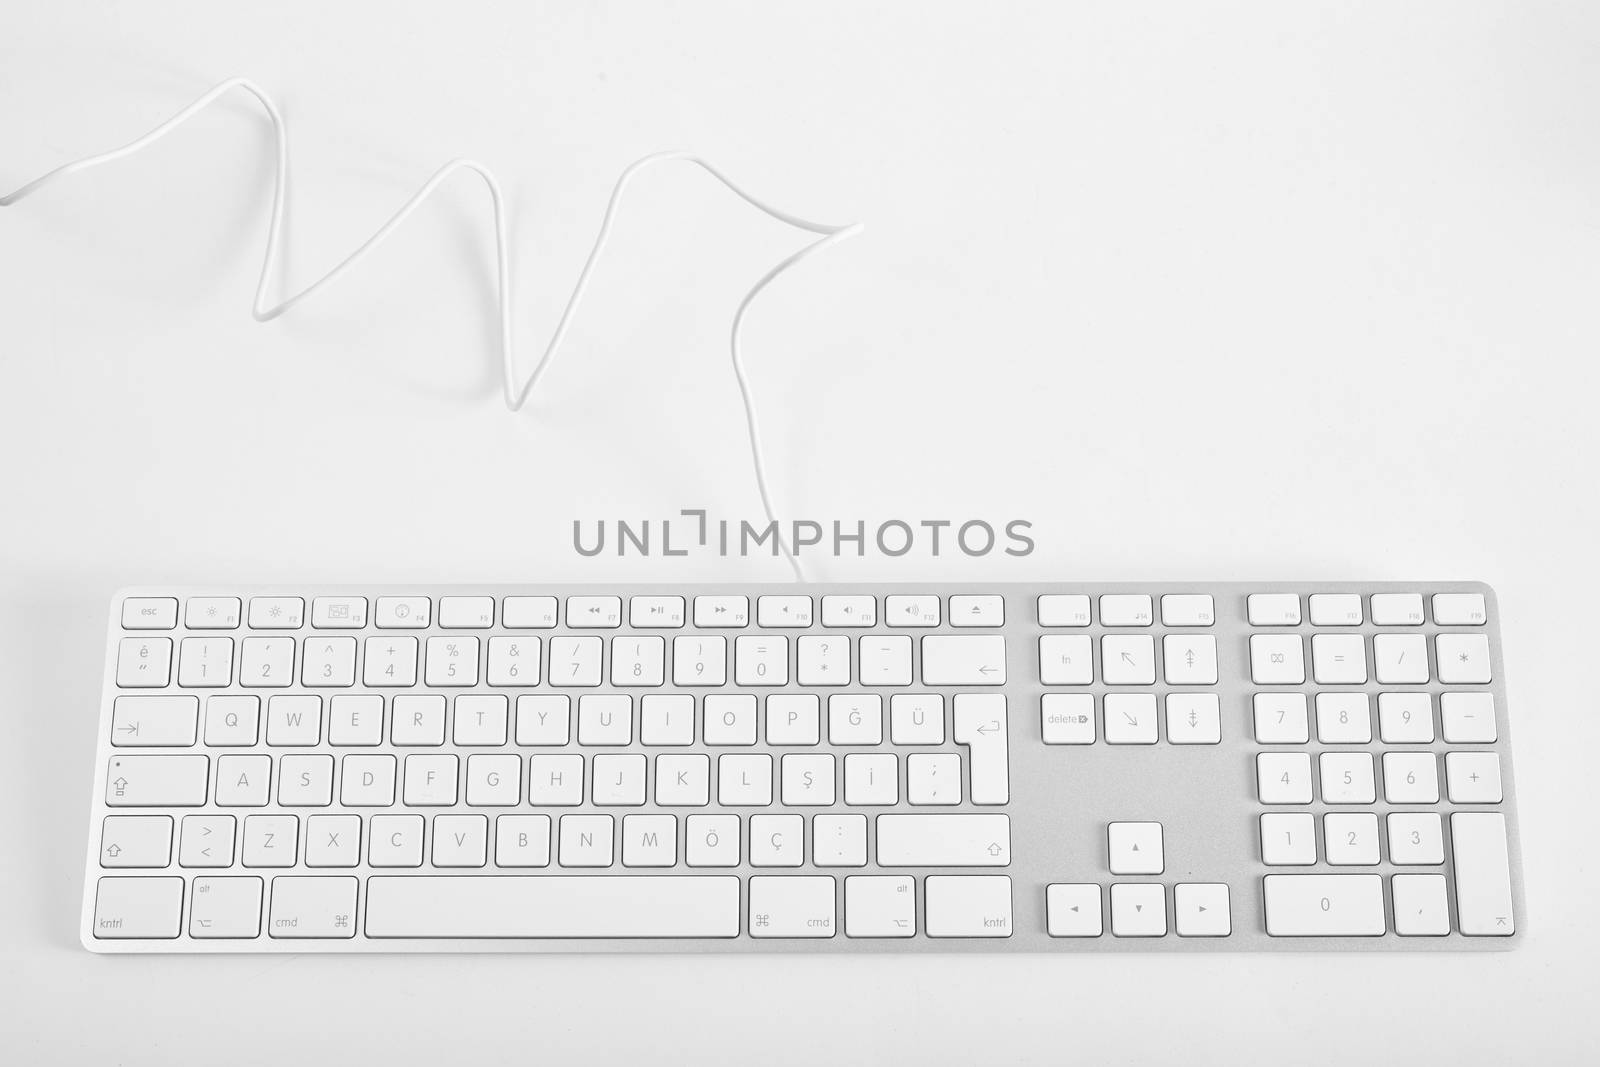 White computer keyboard on a white background